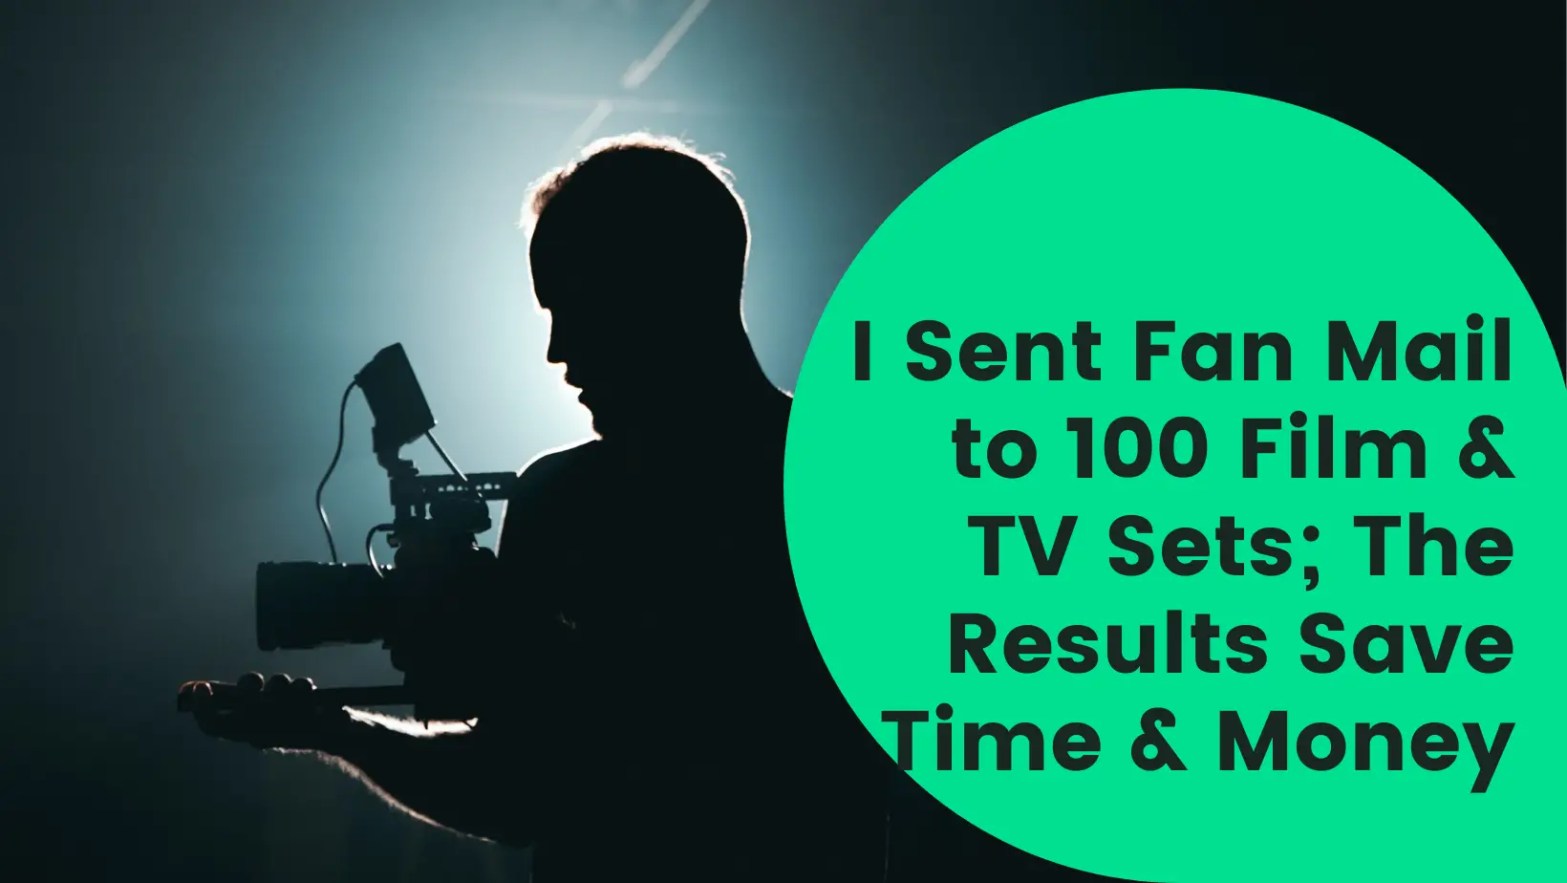 I Sent Fan Mail to 100 Film & TV Sets; The Results Save Time & Money